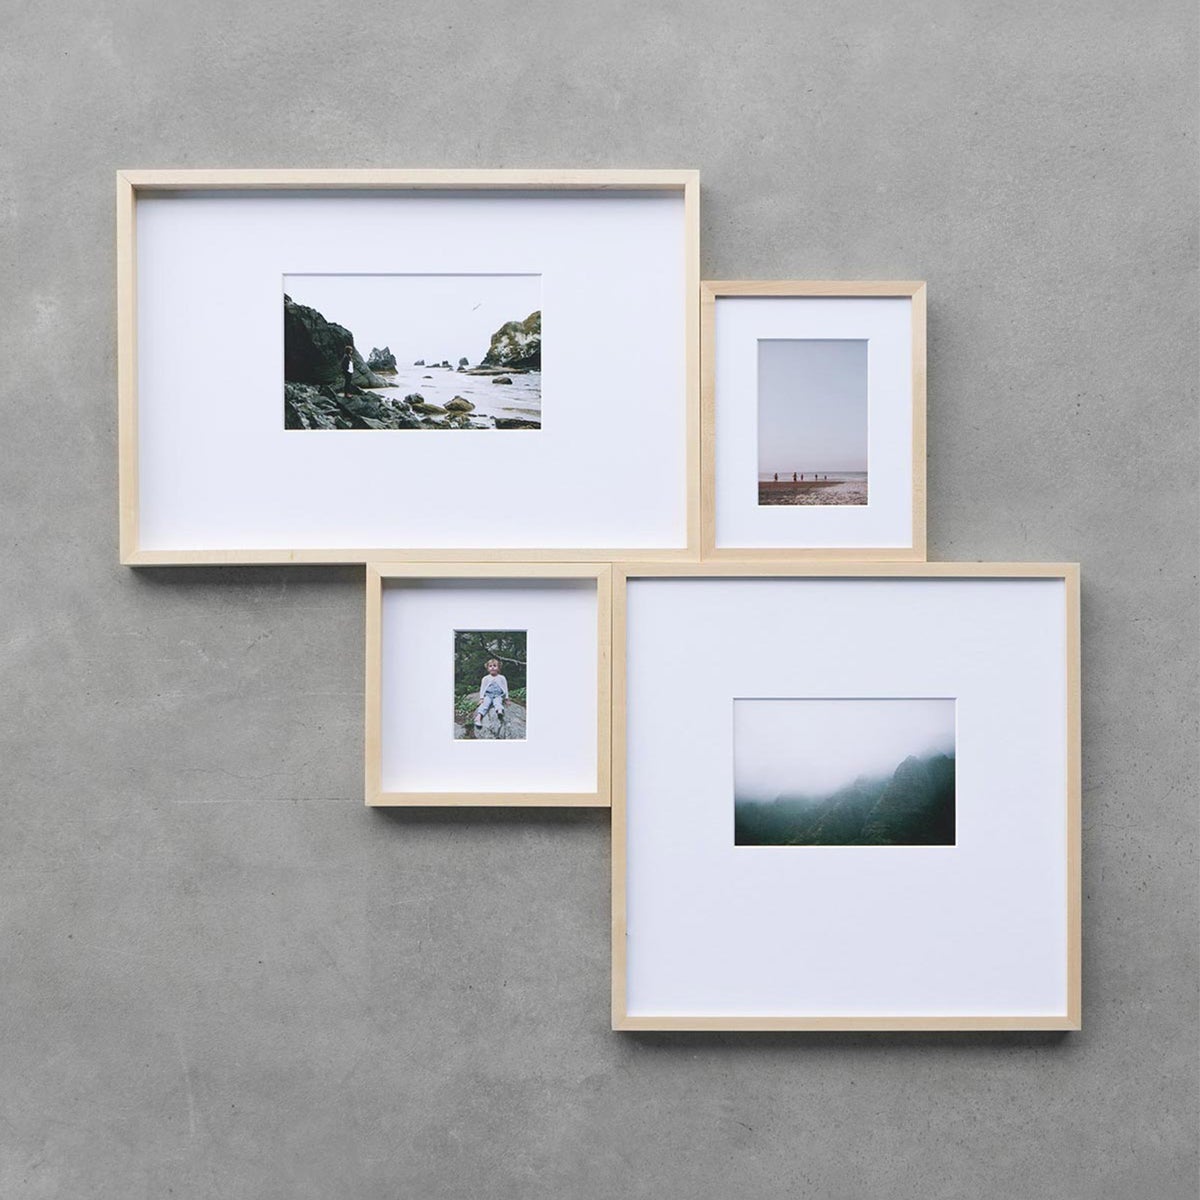 Small gallery wall of matted frames with no space between them